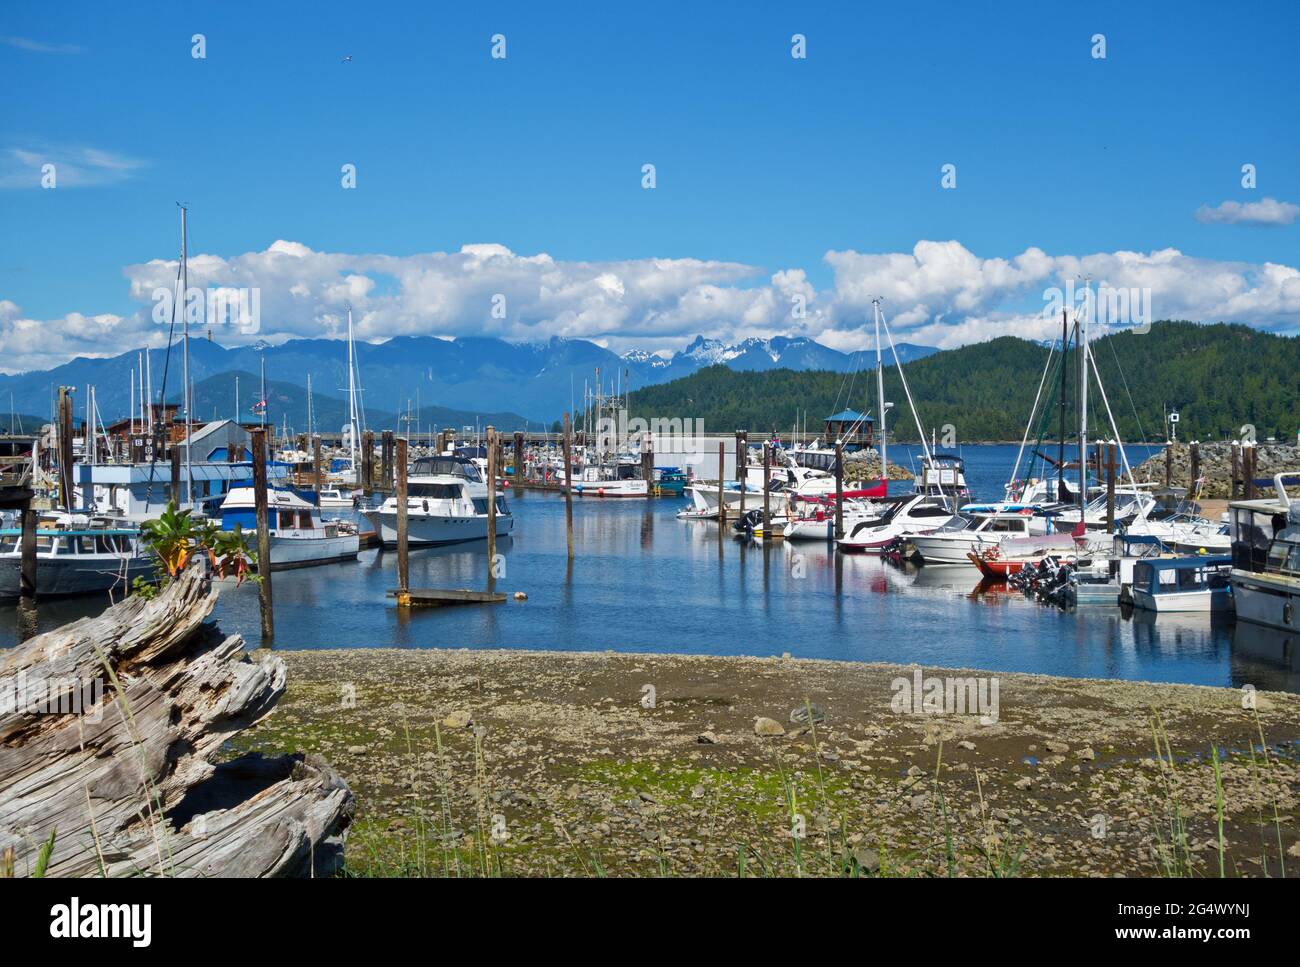 Marina with boats and sailboats in Gibsons, British Columbia, Canada Stock Photo